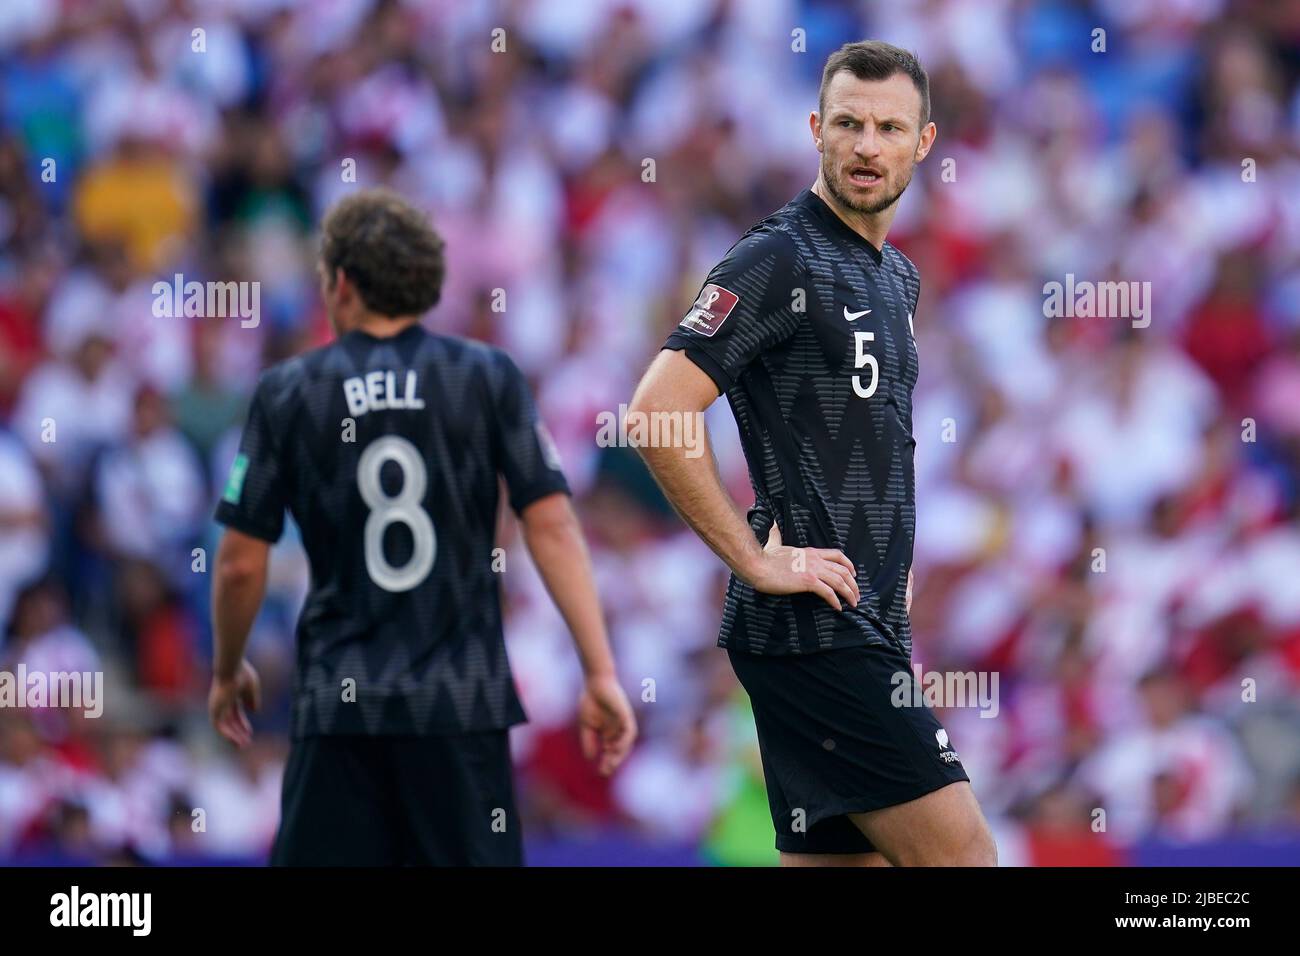 Barcelona, Spain. June 5, 2022, Tommy Smith of New Zealand during the friendly match between Peru and New Zealand played at RCDE Stadium on June 5, 2022 in Barcelona, Spain. (Photo by Bagu Blanco / PRESSINPHOTO) Stock Photo